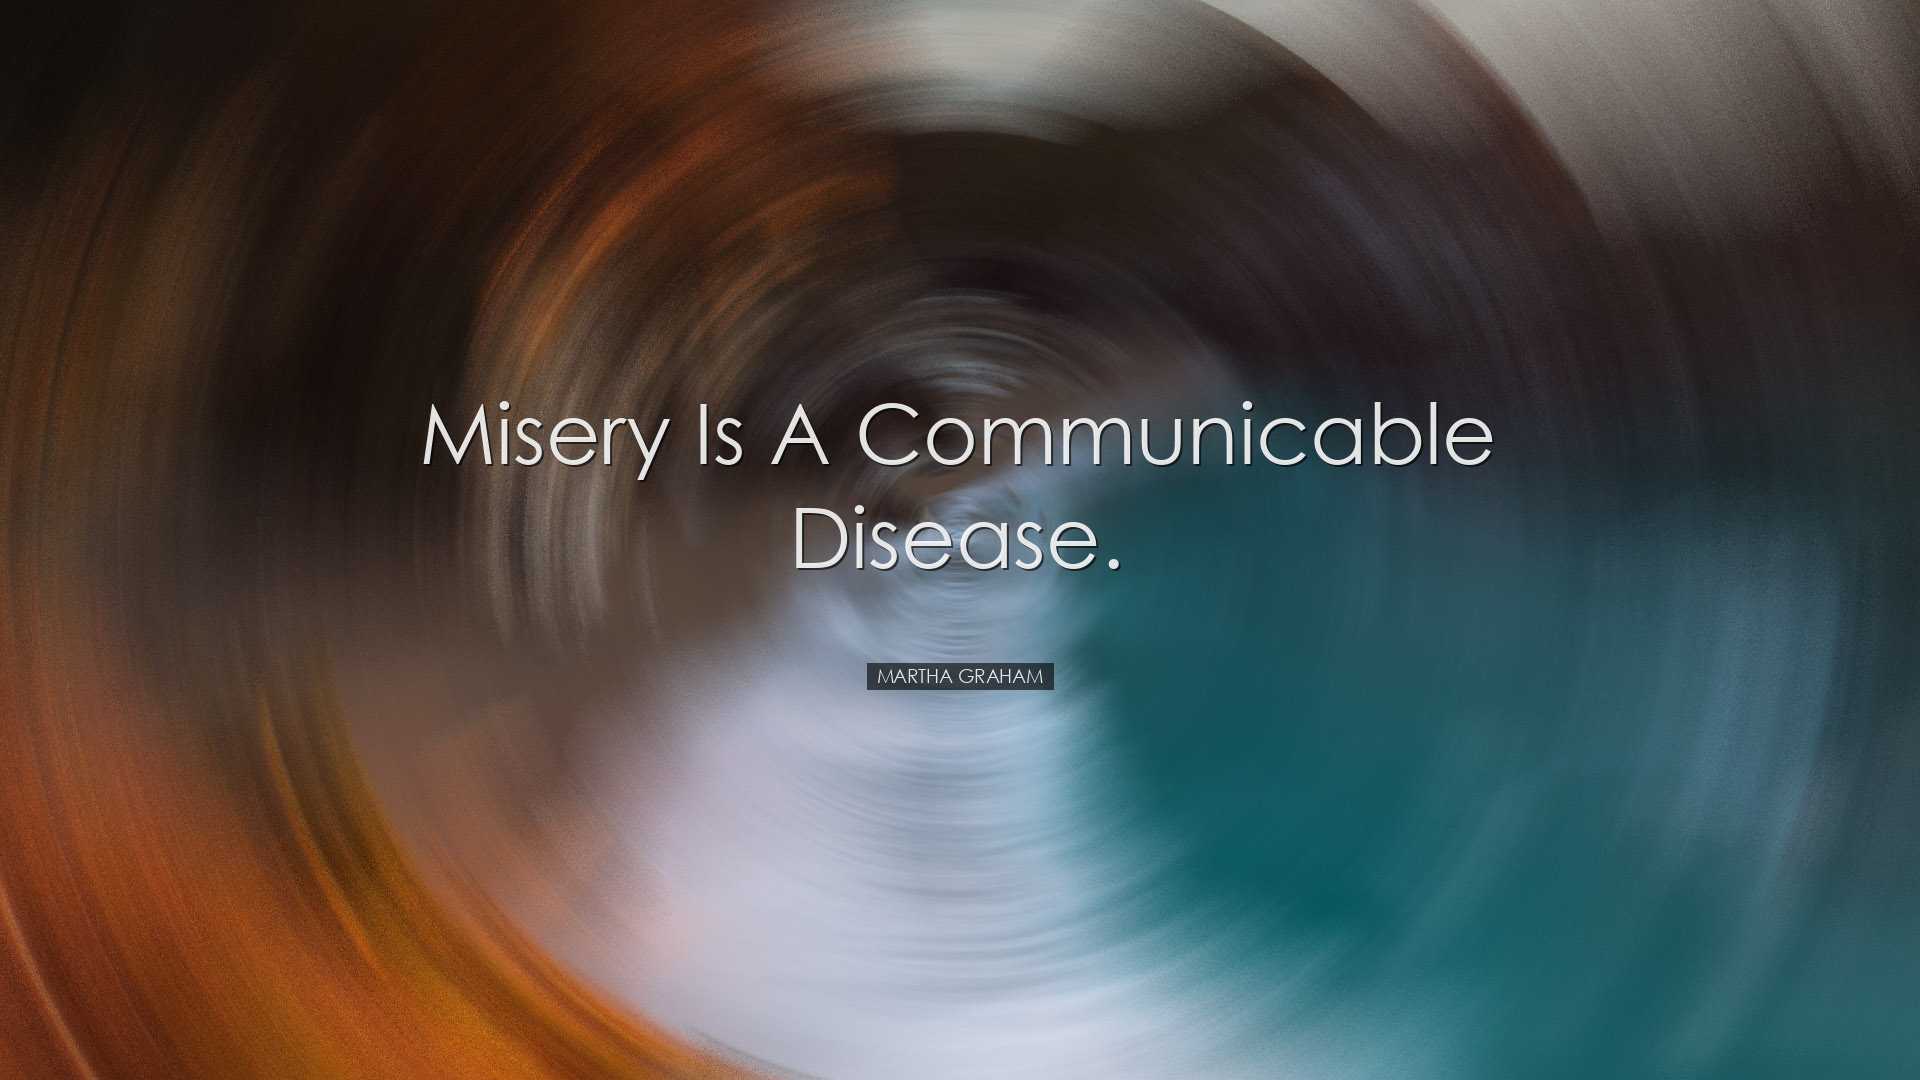 Misery is a communicable disease. - Martha Graham